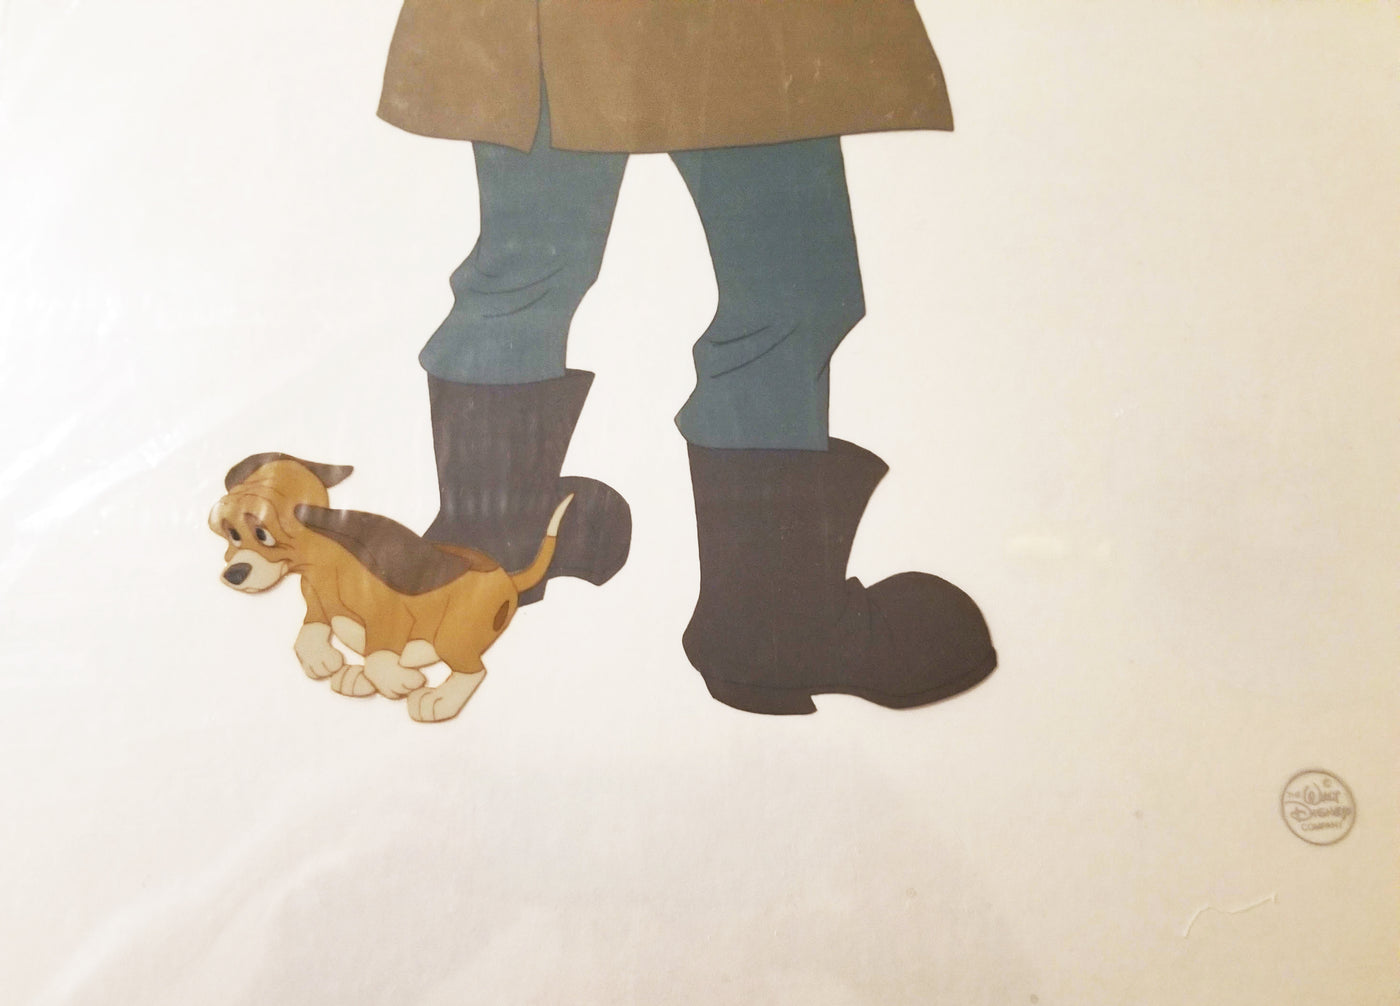 Original Walt Disney Production Cel from The Fox and the Hound featuring young Copper and Slade